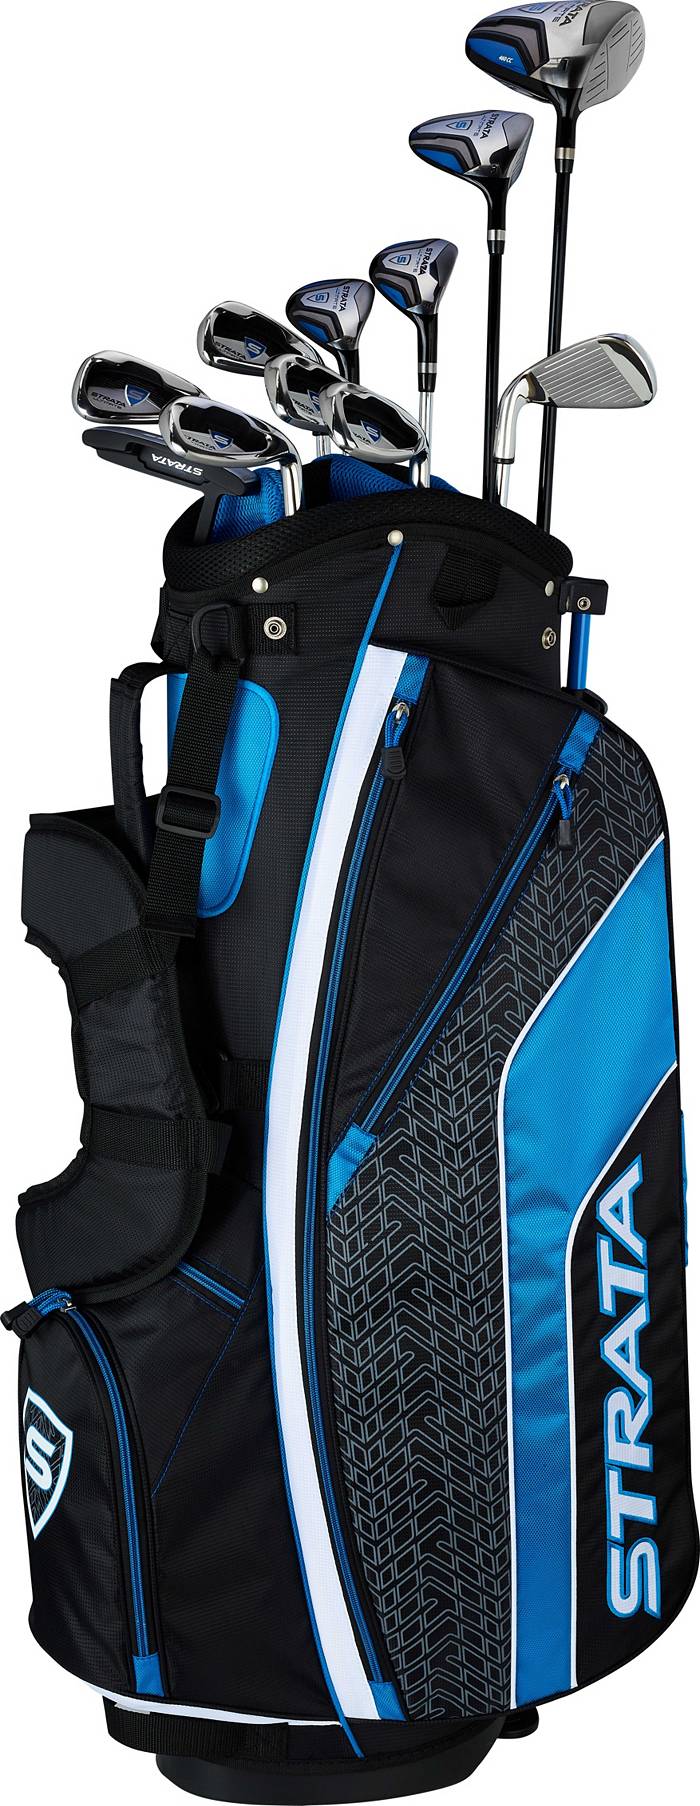 Callaway Golf Men&s Strata Complete 12 Piece Package Set Right